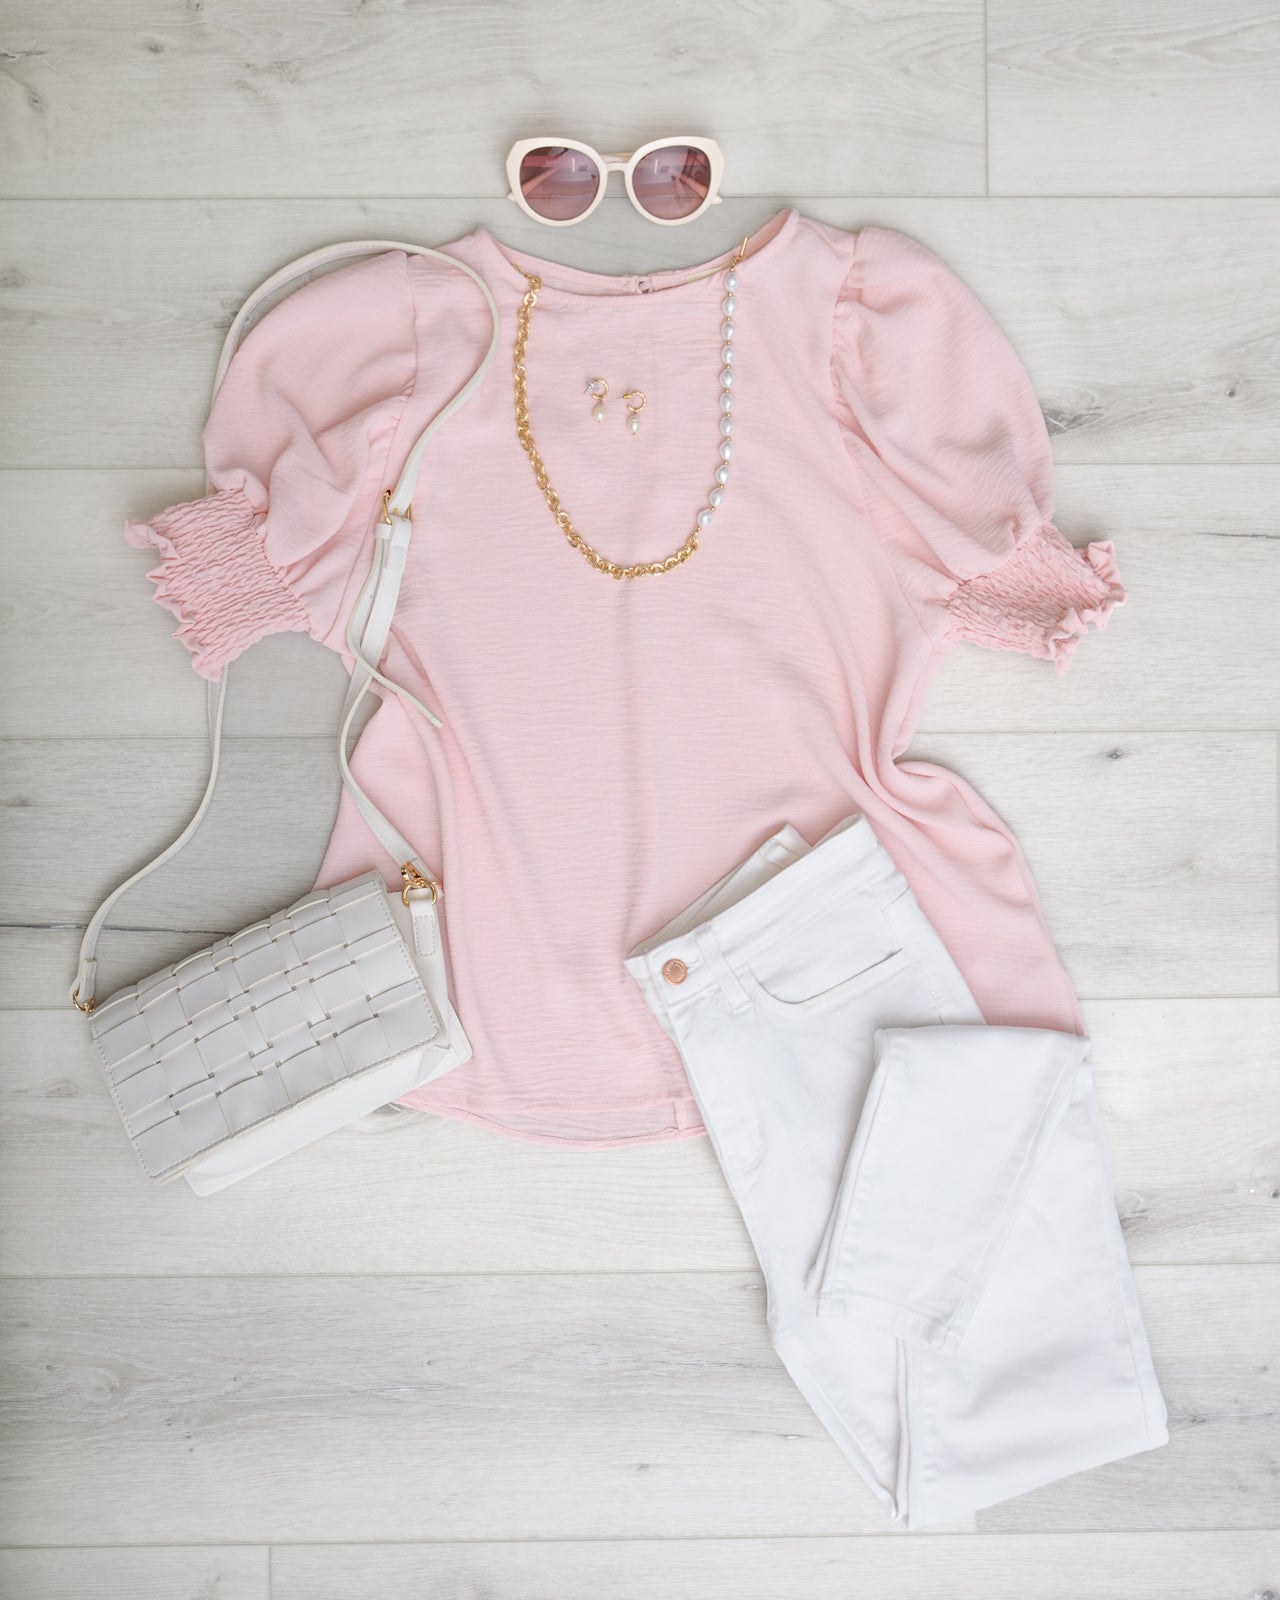 pink outfit ideas